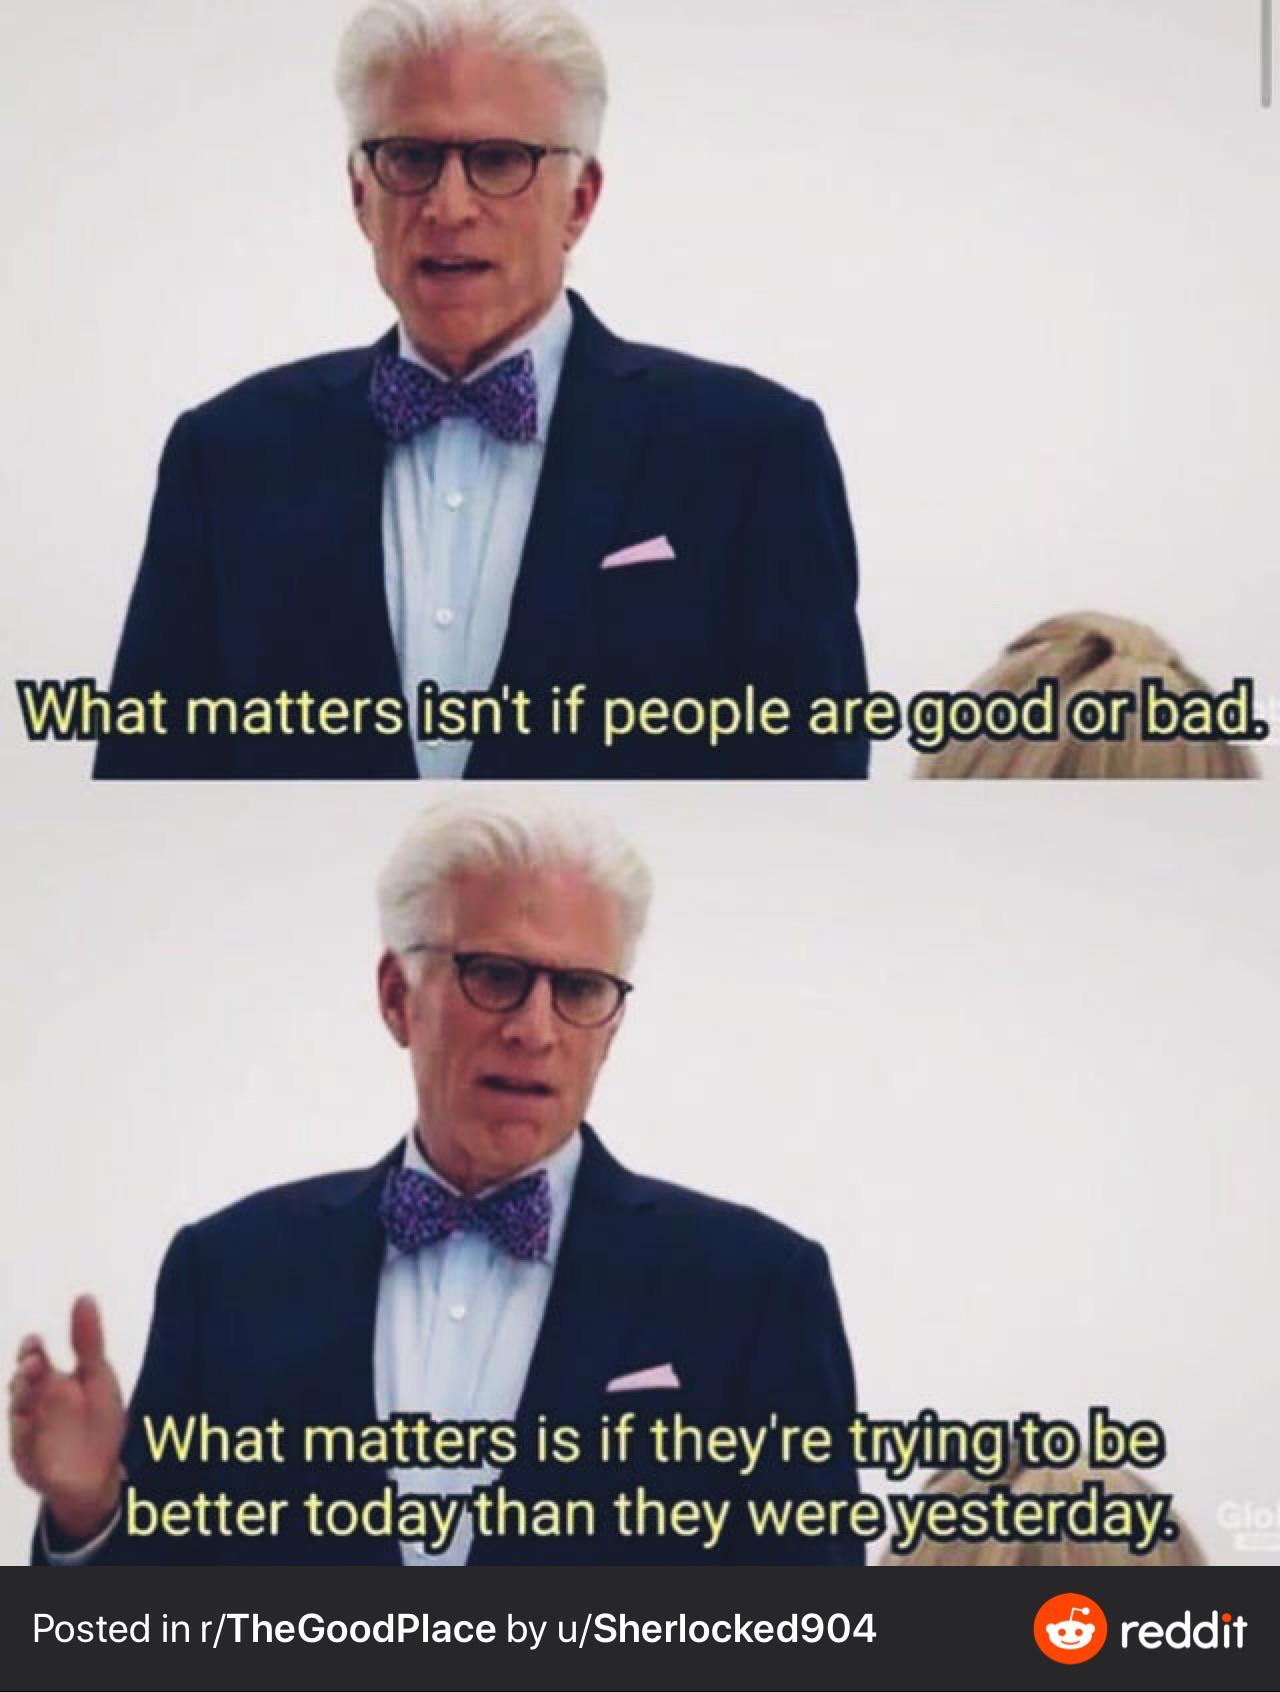 Cute, wholesome memes, Hitler, Jews Wholesome Memes Cute, wholesome memes, Hitler, Jews text: What matters isn't if people are good or bad. What matters is if they're trying to be better toduthan they were yesterday. reddit Posted in r/TheGoodPlace by u/Sherlocked904 